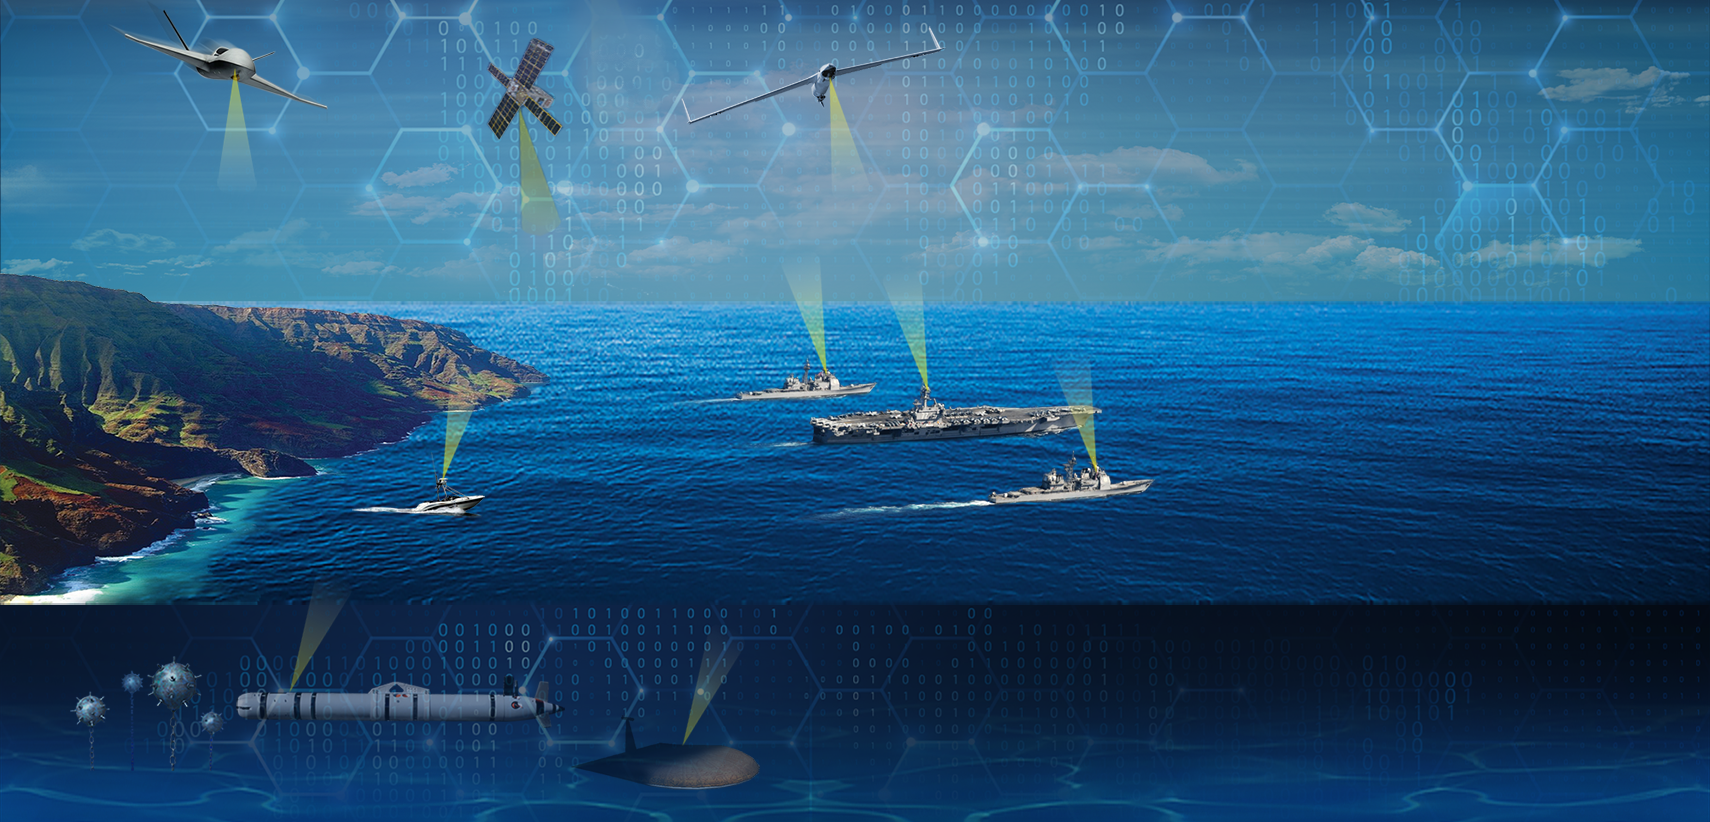 A network of ships, drones, submarines and underwater devices communicating. The communication rays are shown.